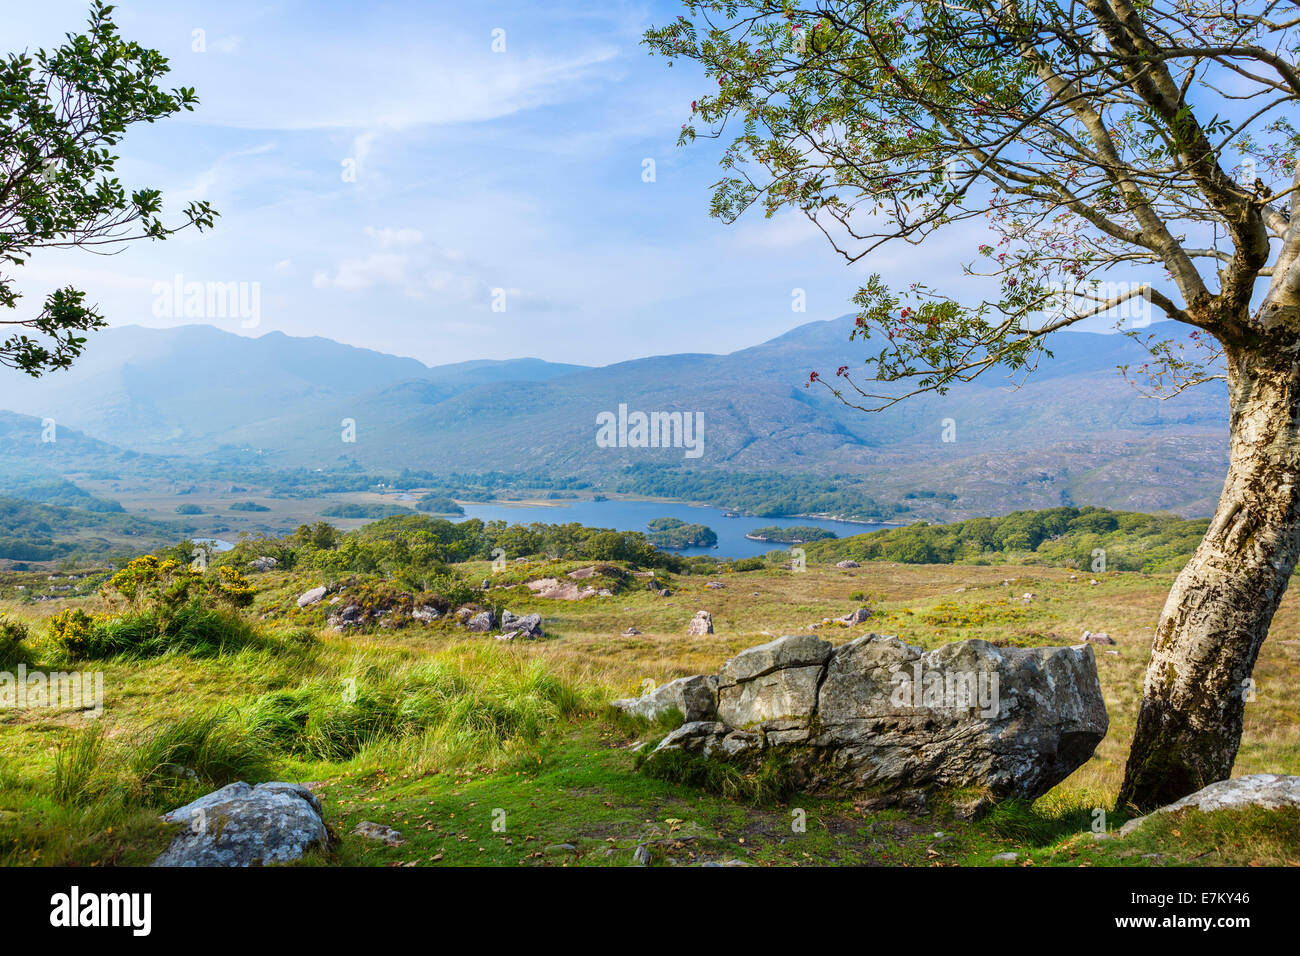 Ireland landscape. The Lakes of Killarney seen from Ladies View on N71 Ring of Kerry, Killarney National Park, County Kerry, Republic of Ireland Stock Photo